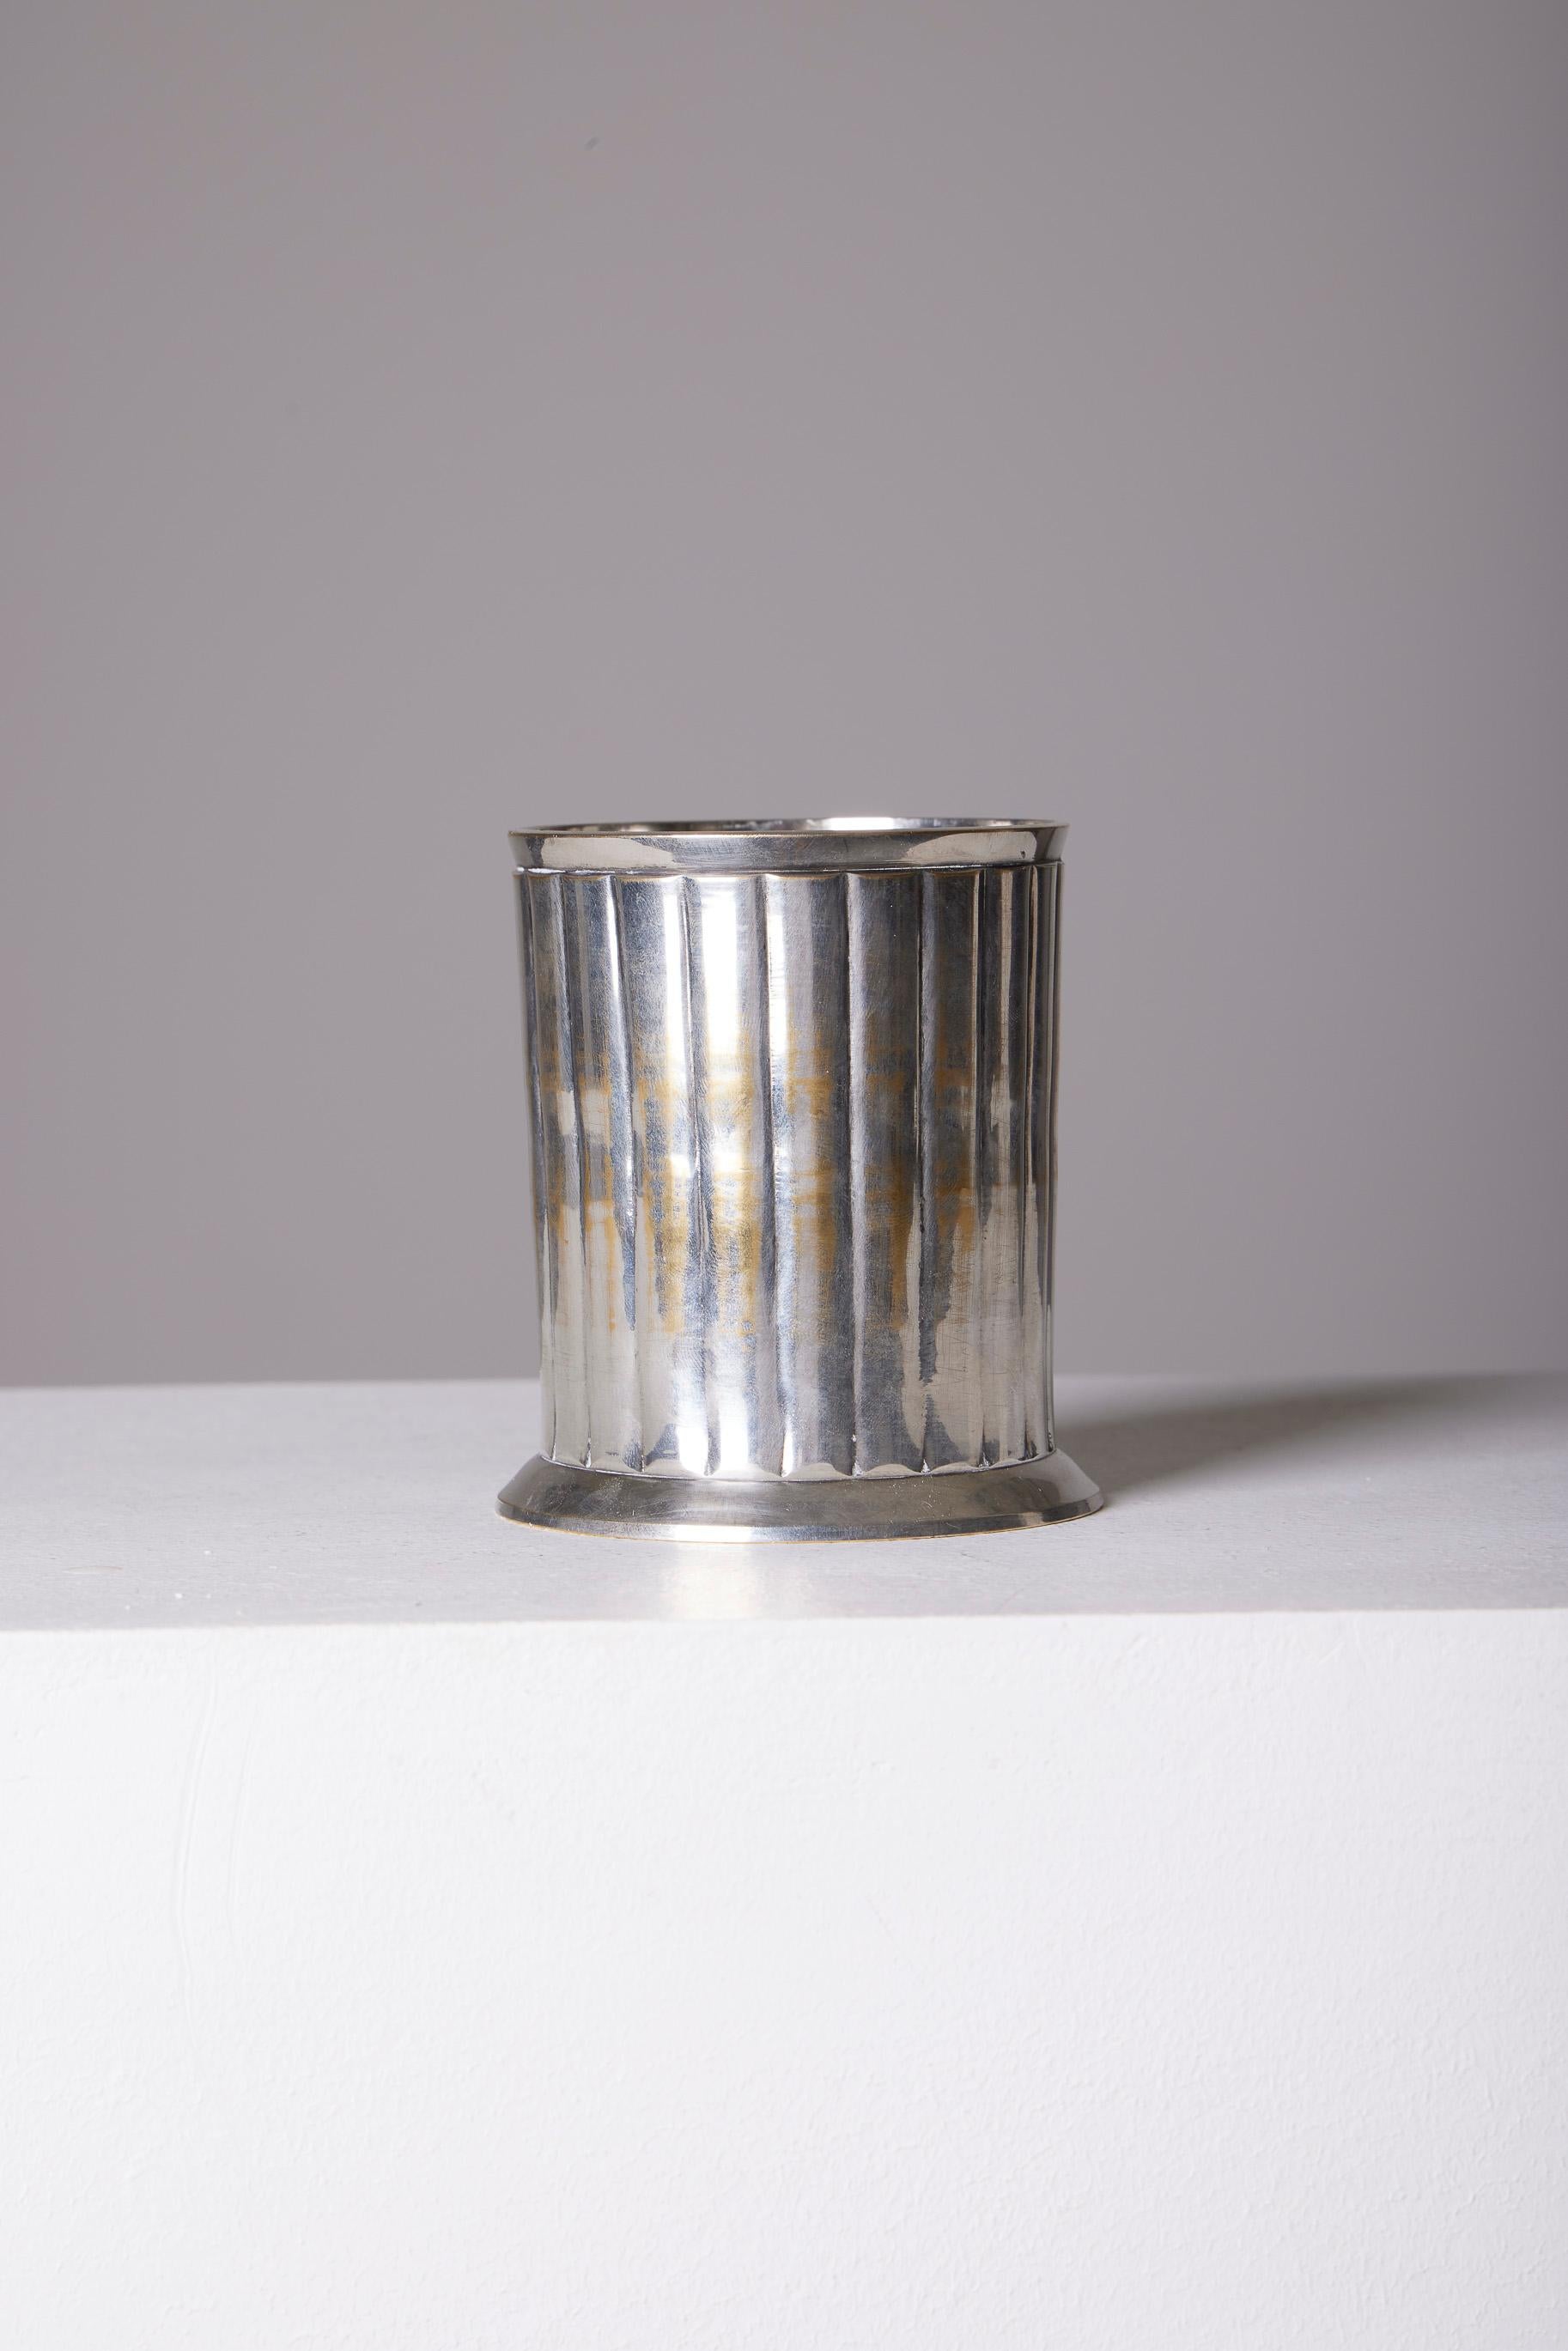  Silver-plated metal cylindrical candle holder, featuring a striated pattern on the surface. In excellent condition.
LP2619